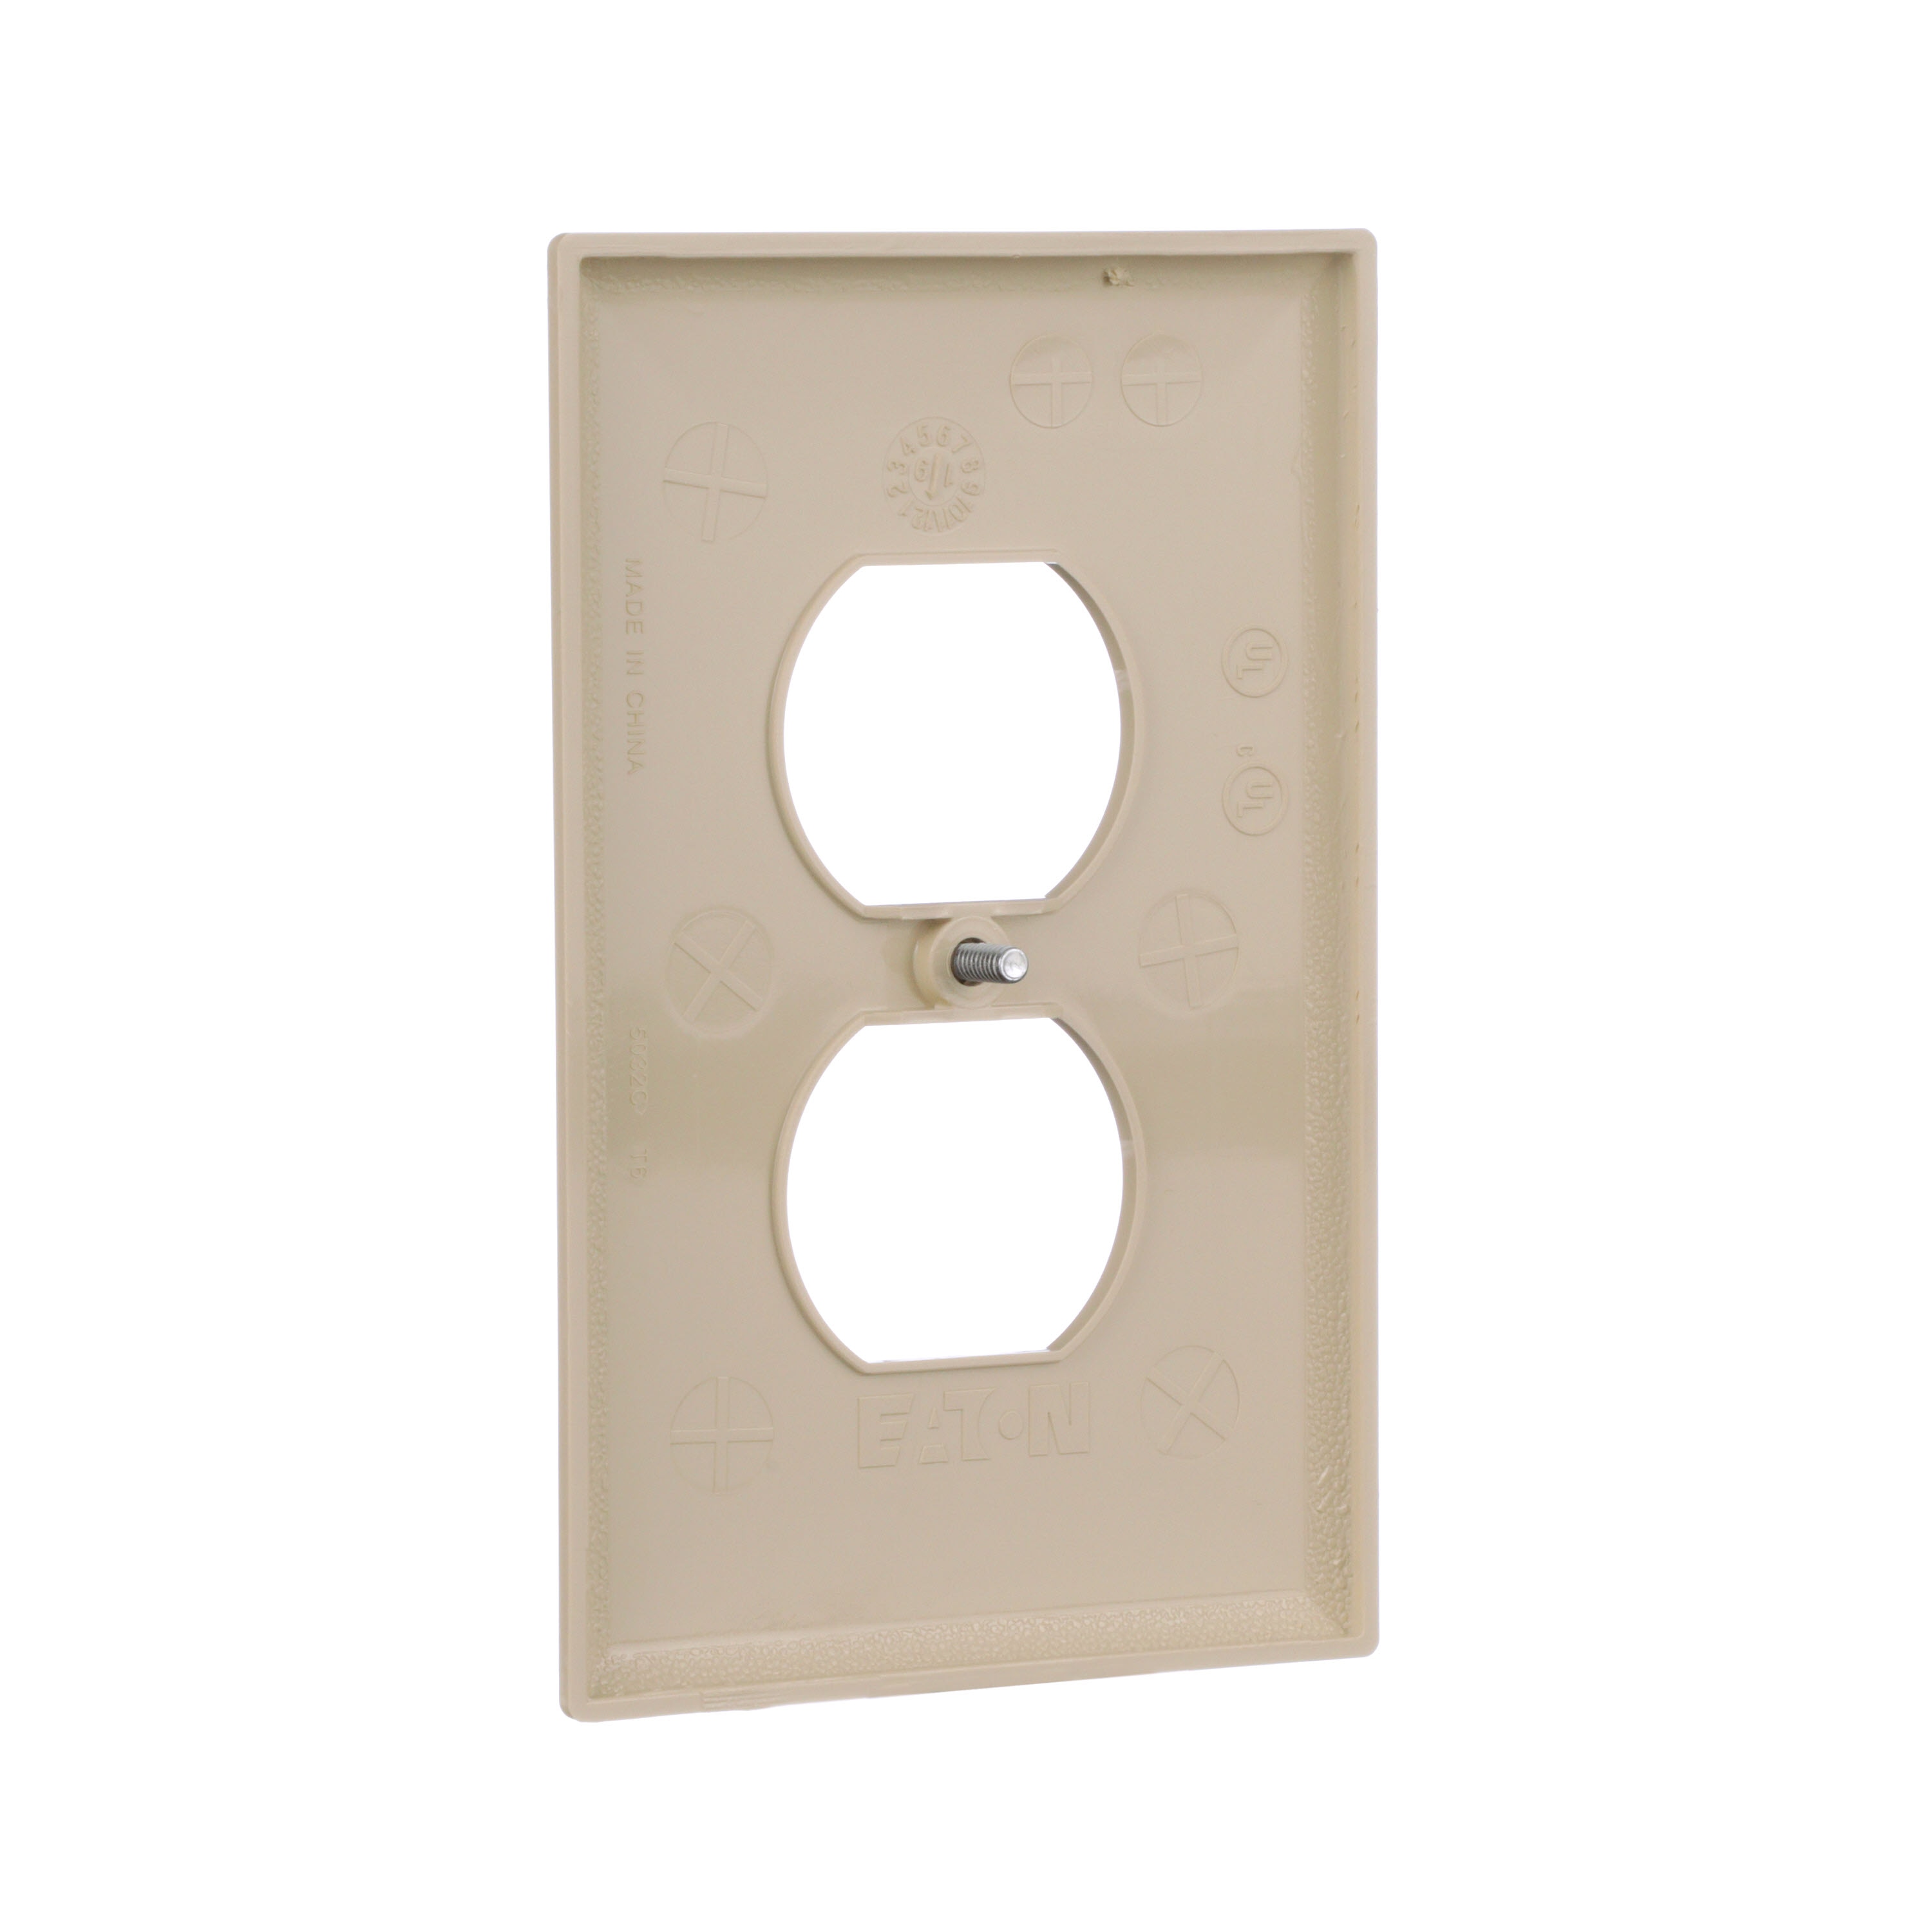 Cooper PJ82V Ivory Mid-Size Two Gang Duplex Recept Wall Plate 50 pack Eaton